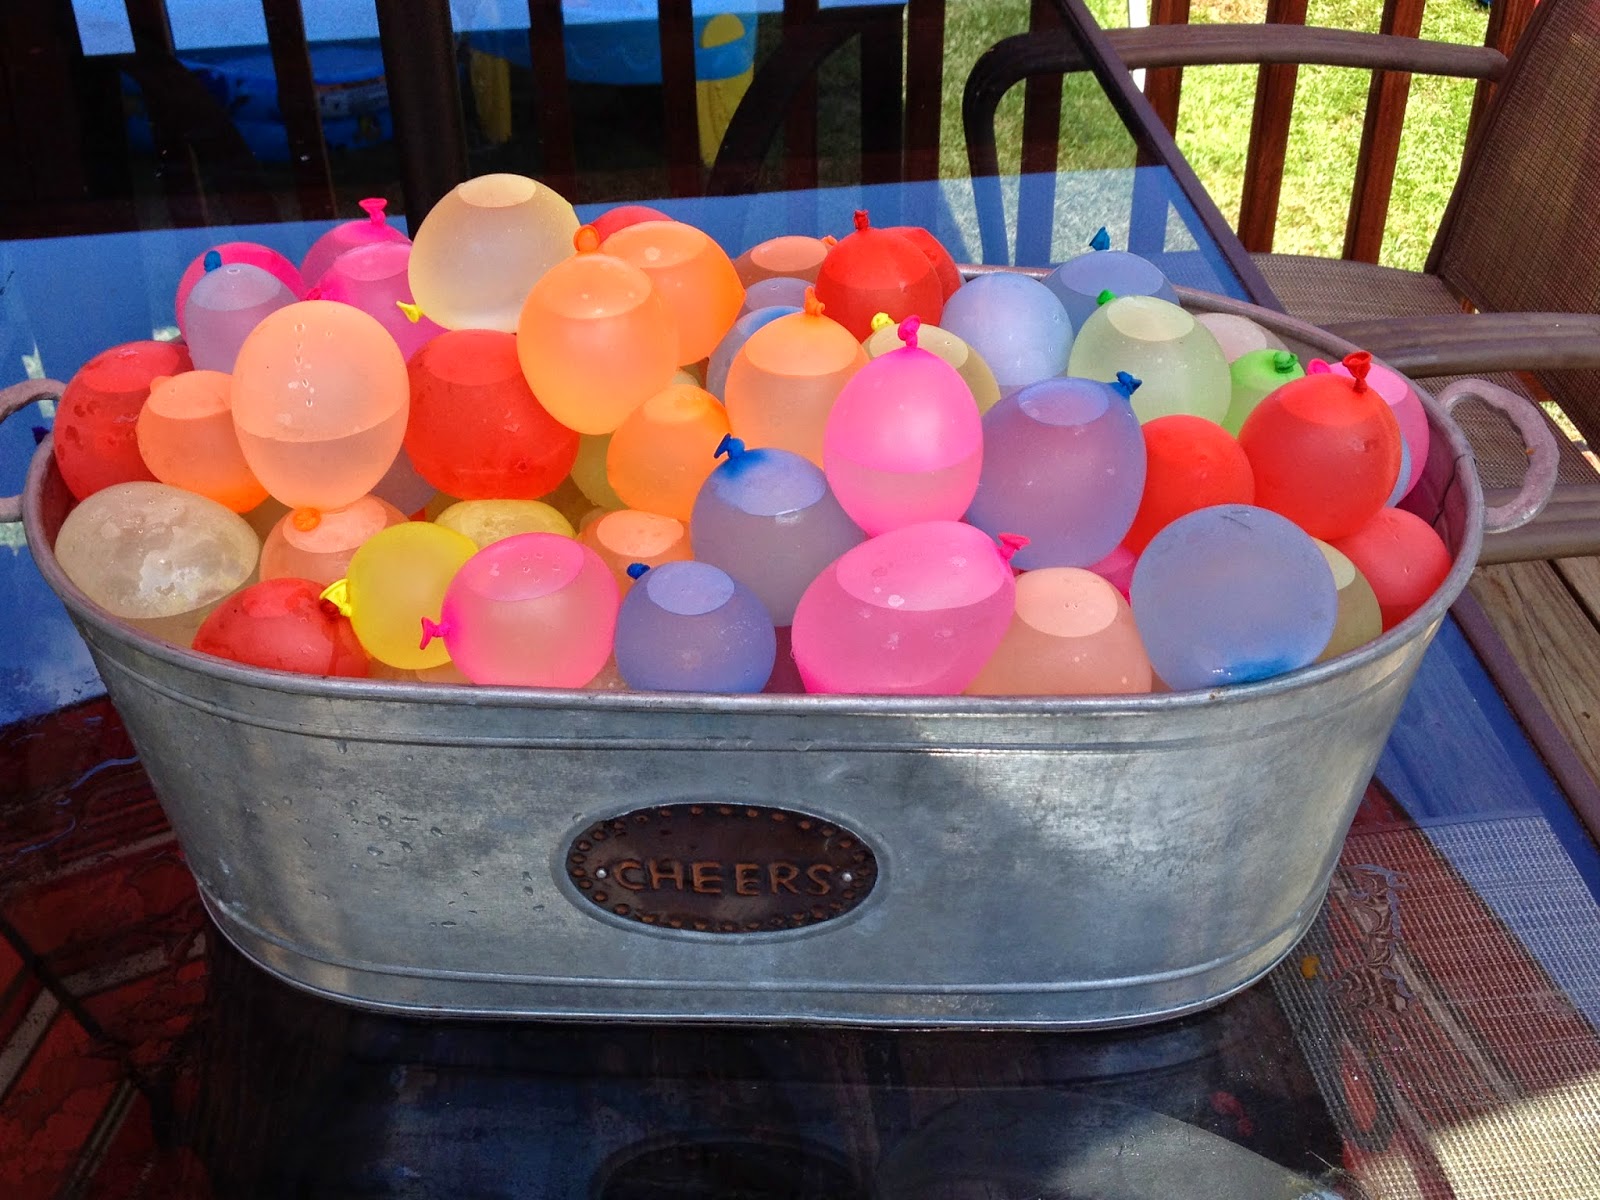 A bucket filled with colorful balloons sitting on a table.